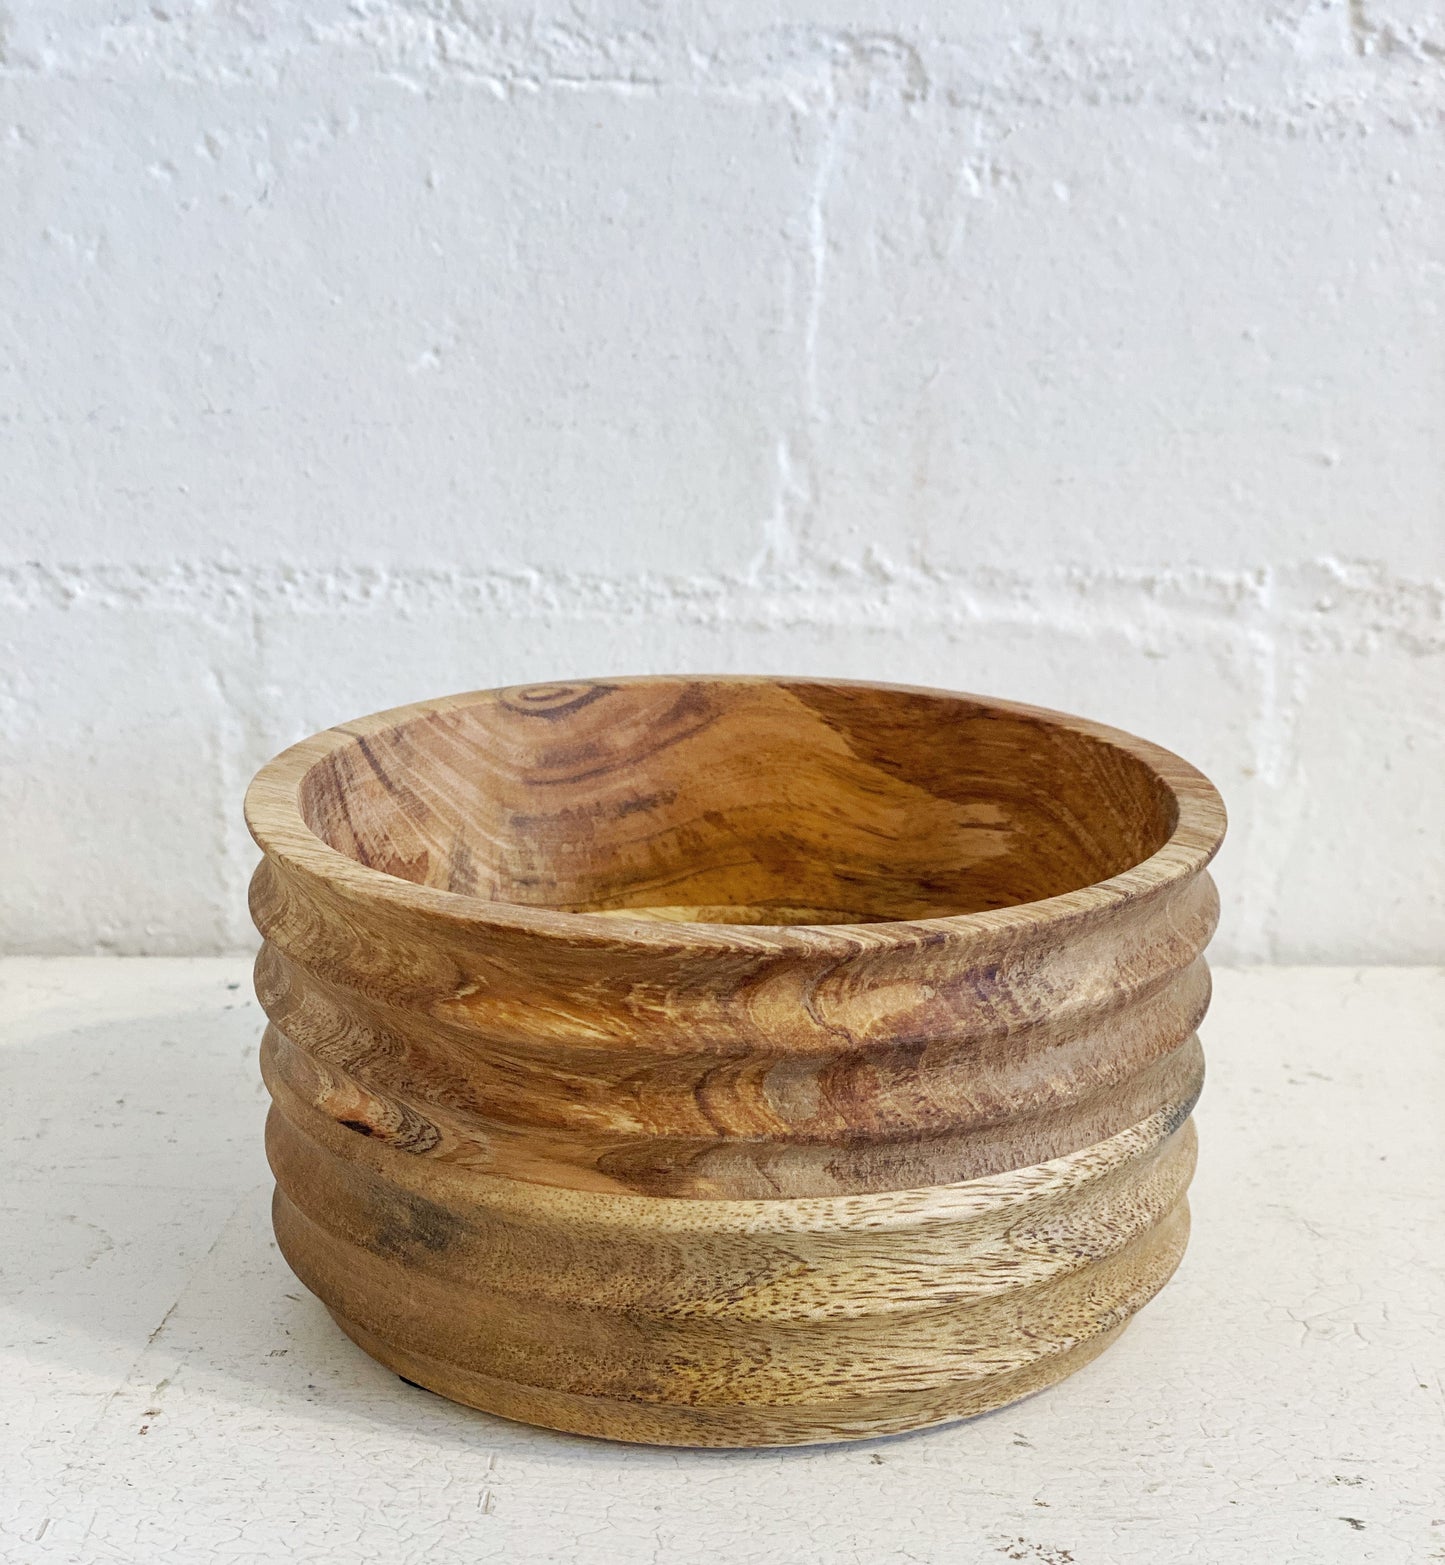 Wood Grooved Bowl